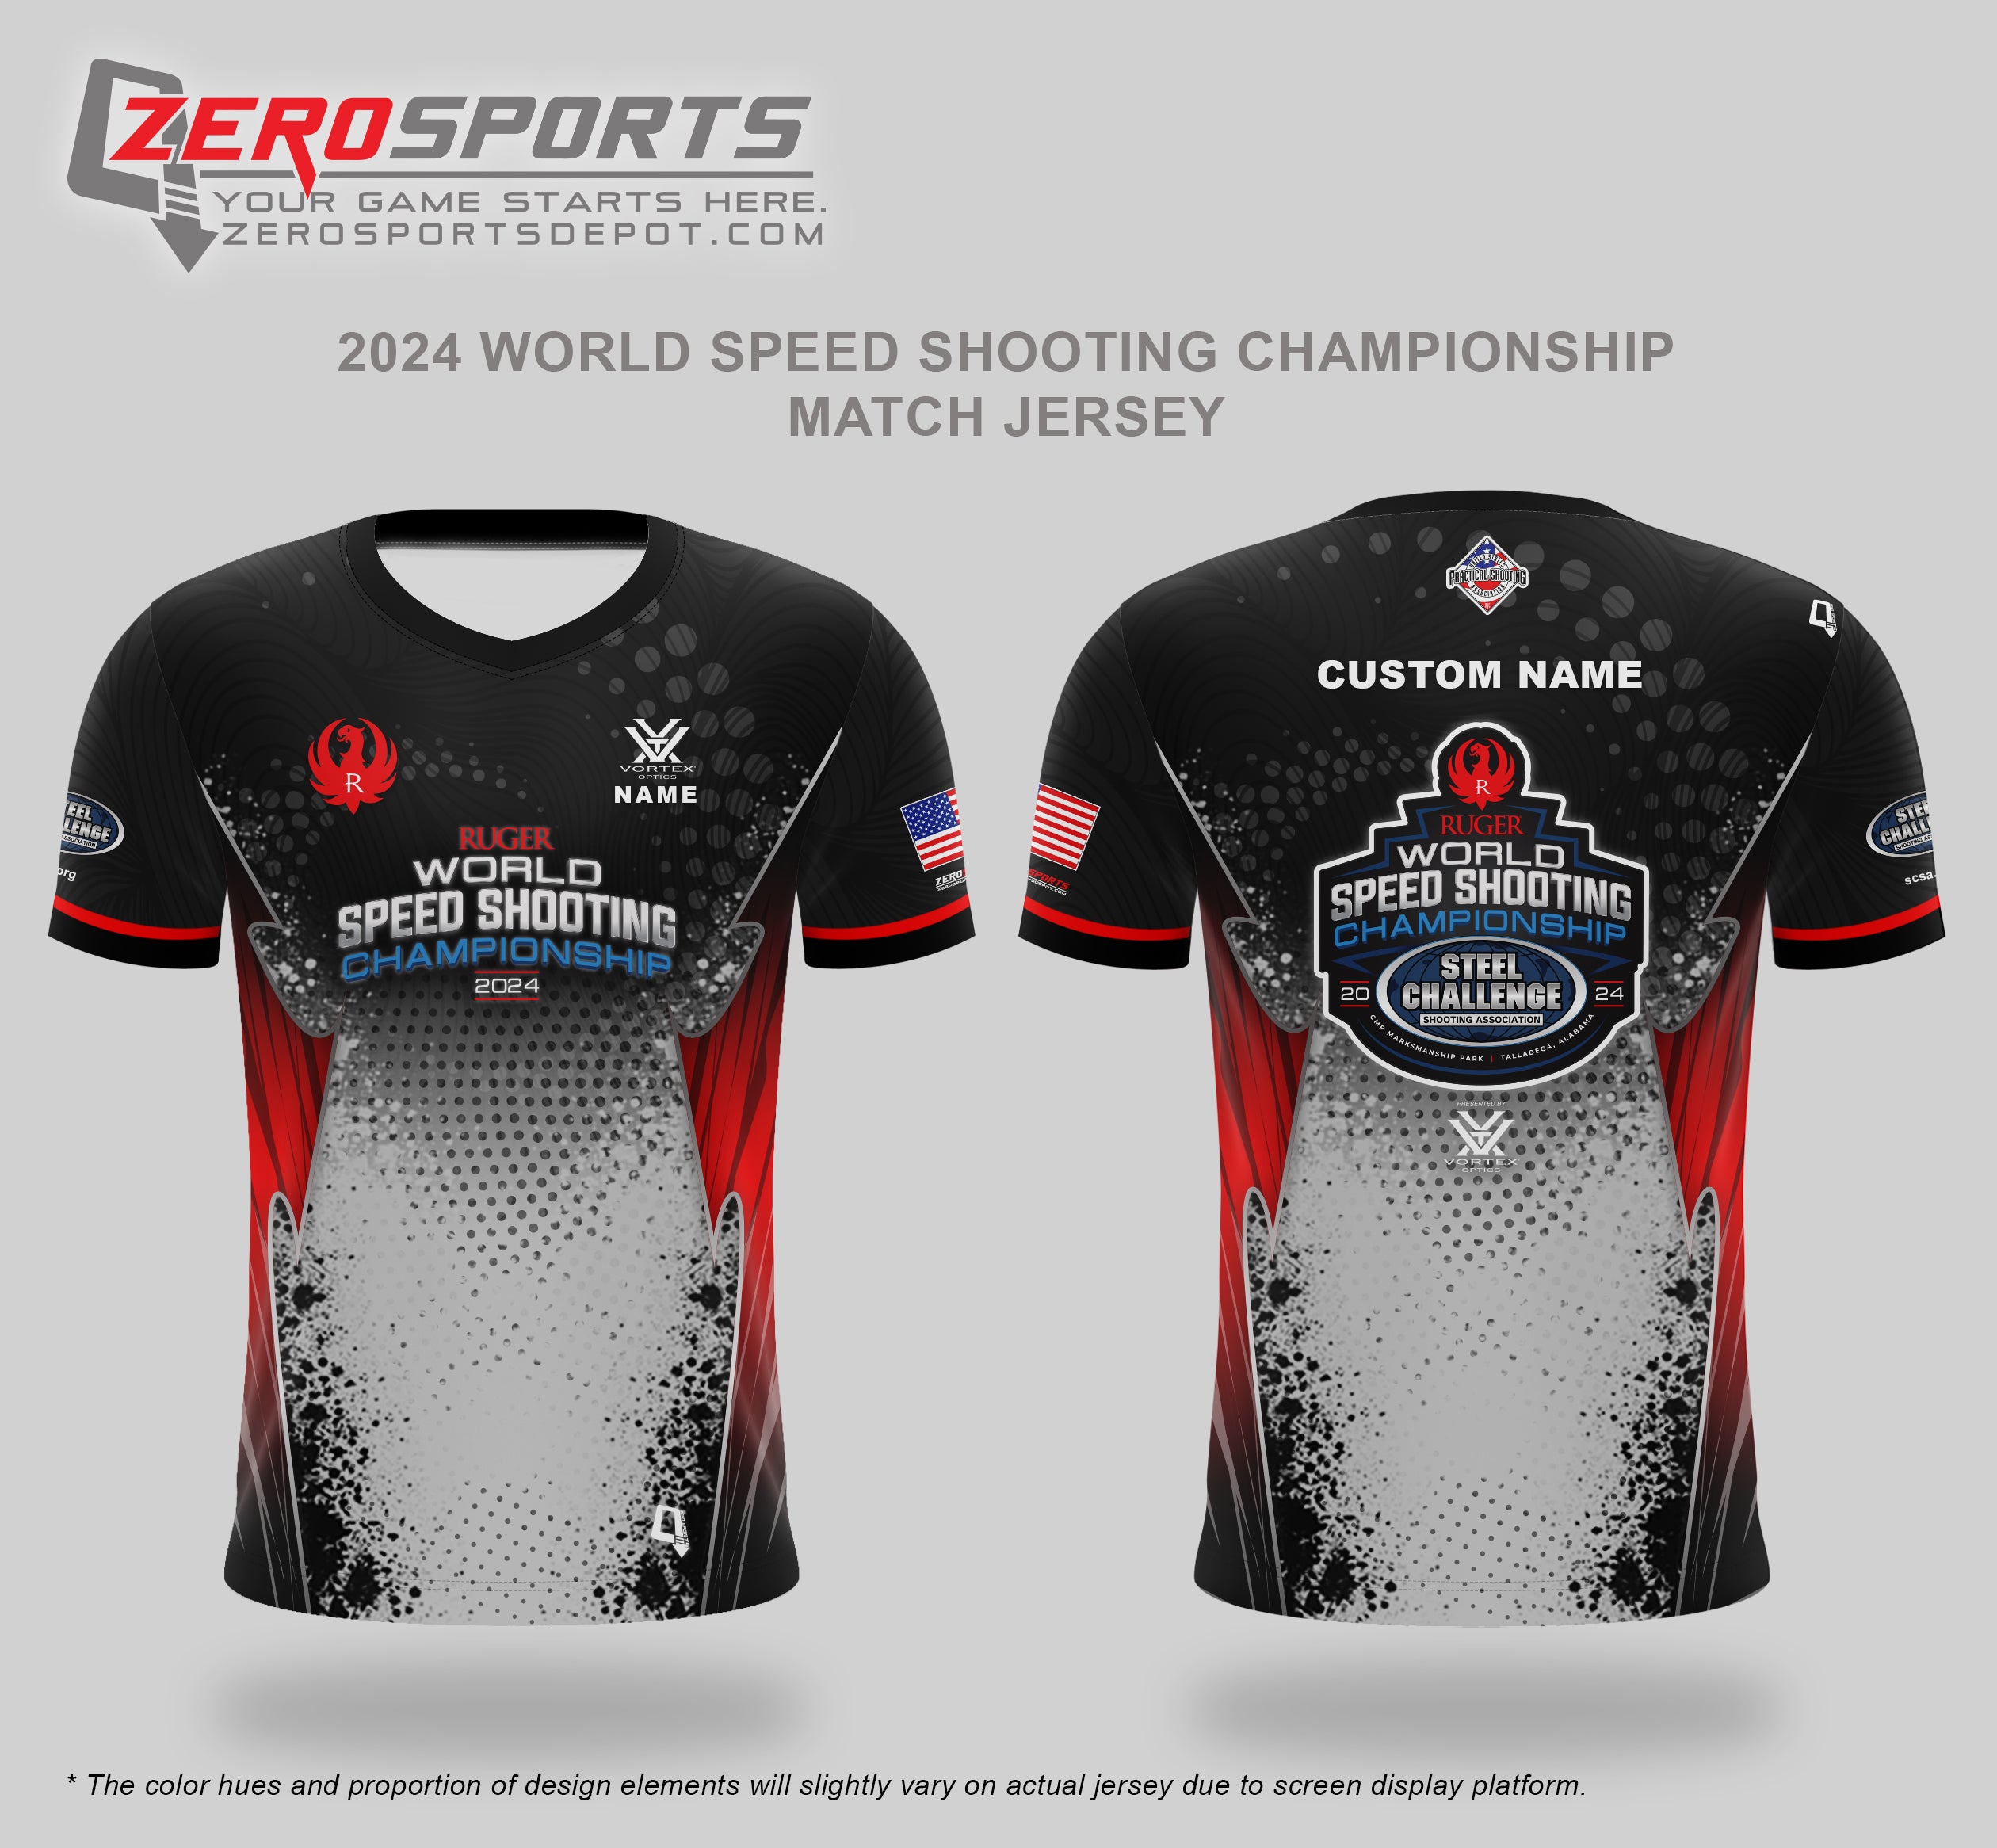 The Ruger 2024 World Speed Shooting Championship presented by Vortex Optics Match Jersey  **All orders after 4/12/2024 will be shipped directly to your address after the match.